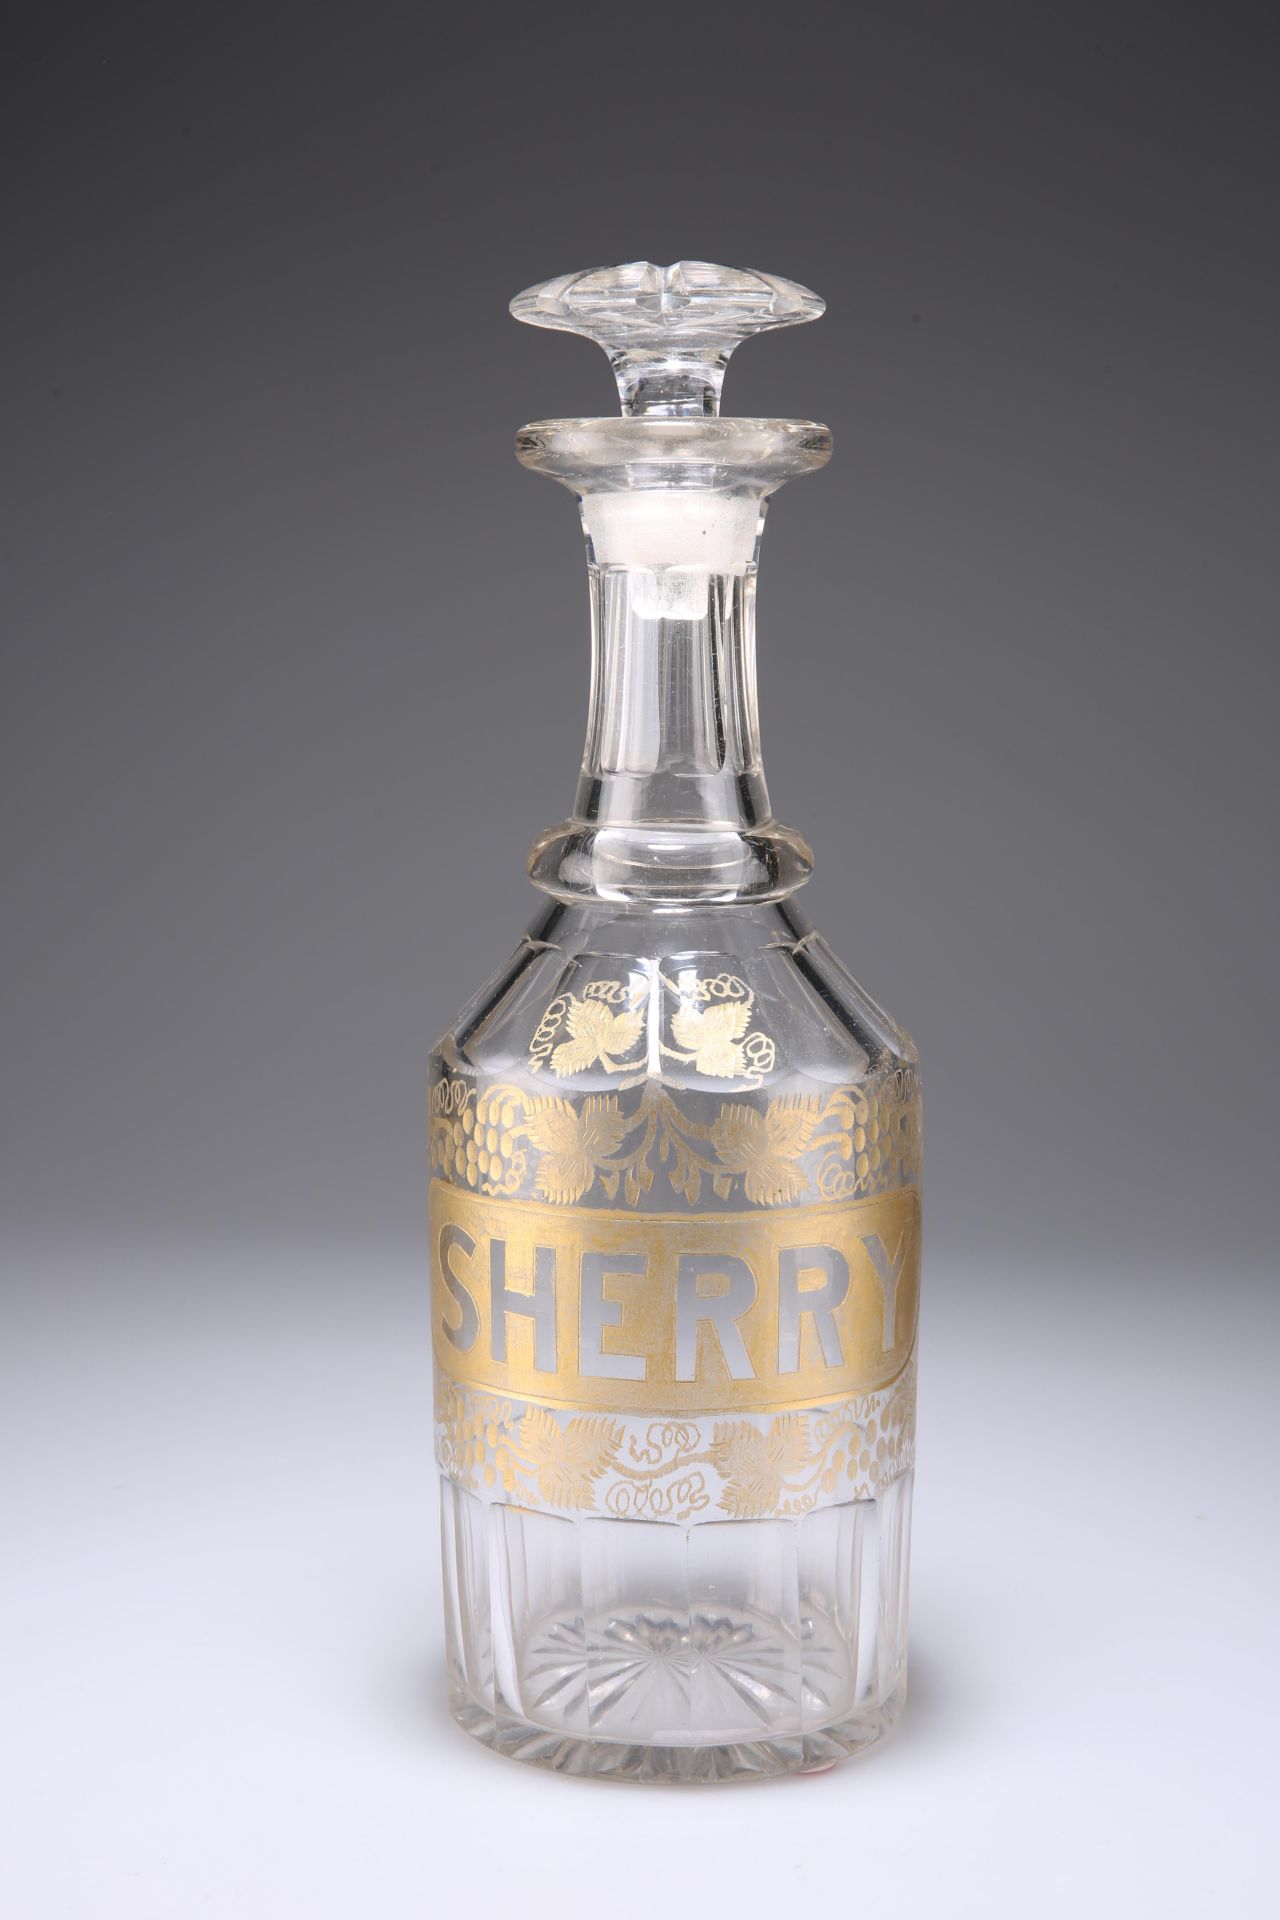 AN EARLY 19TH CENTURY GILDED GLASS SHERRY DECANTER, with facet cut collar around the base and